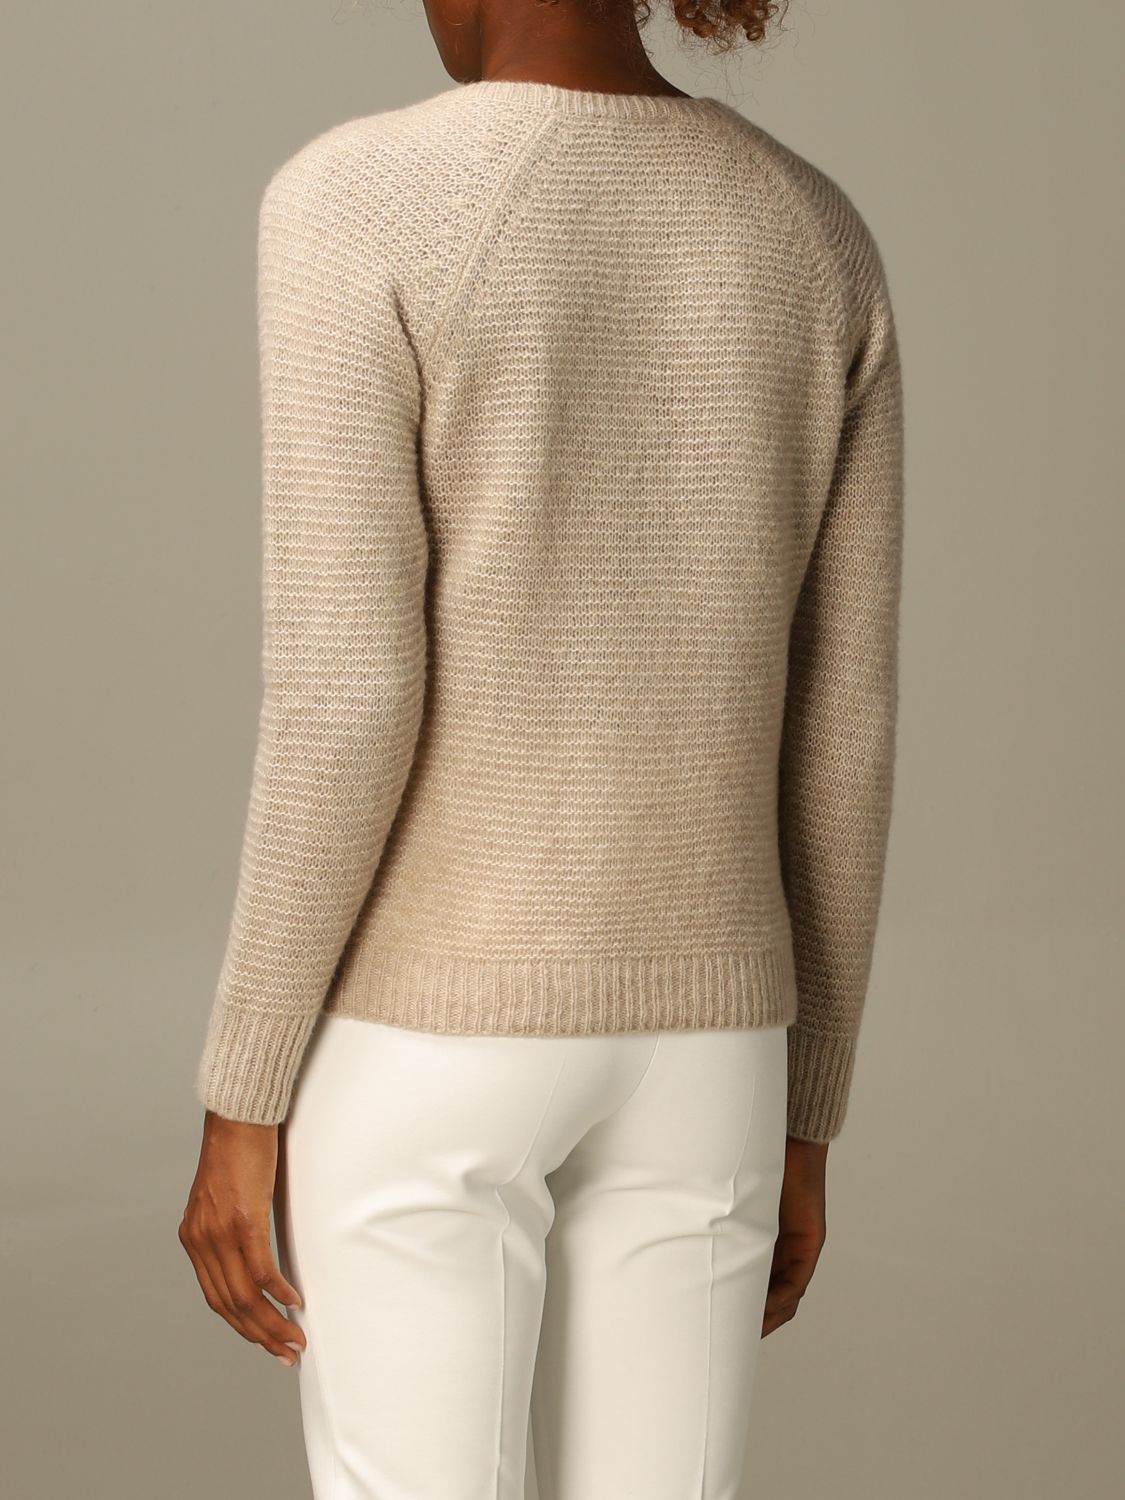 Max Mara Outlet: Satrapo pullover in goat cashmere - Beige | Sweater